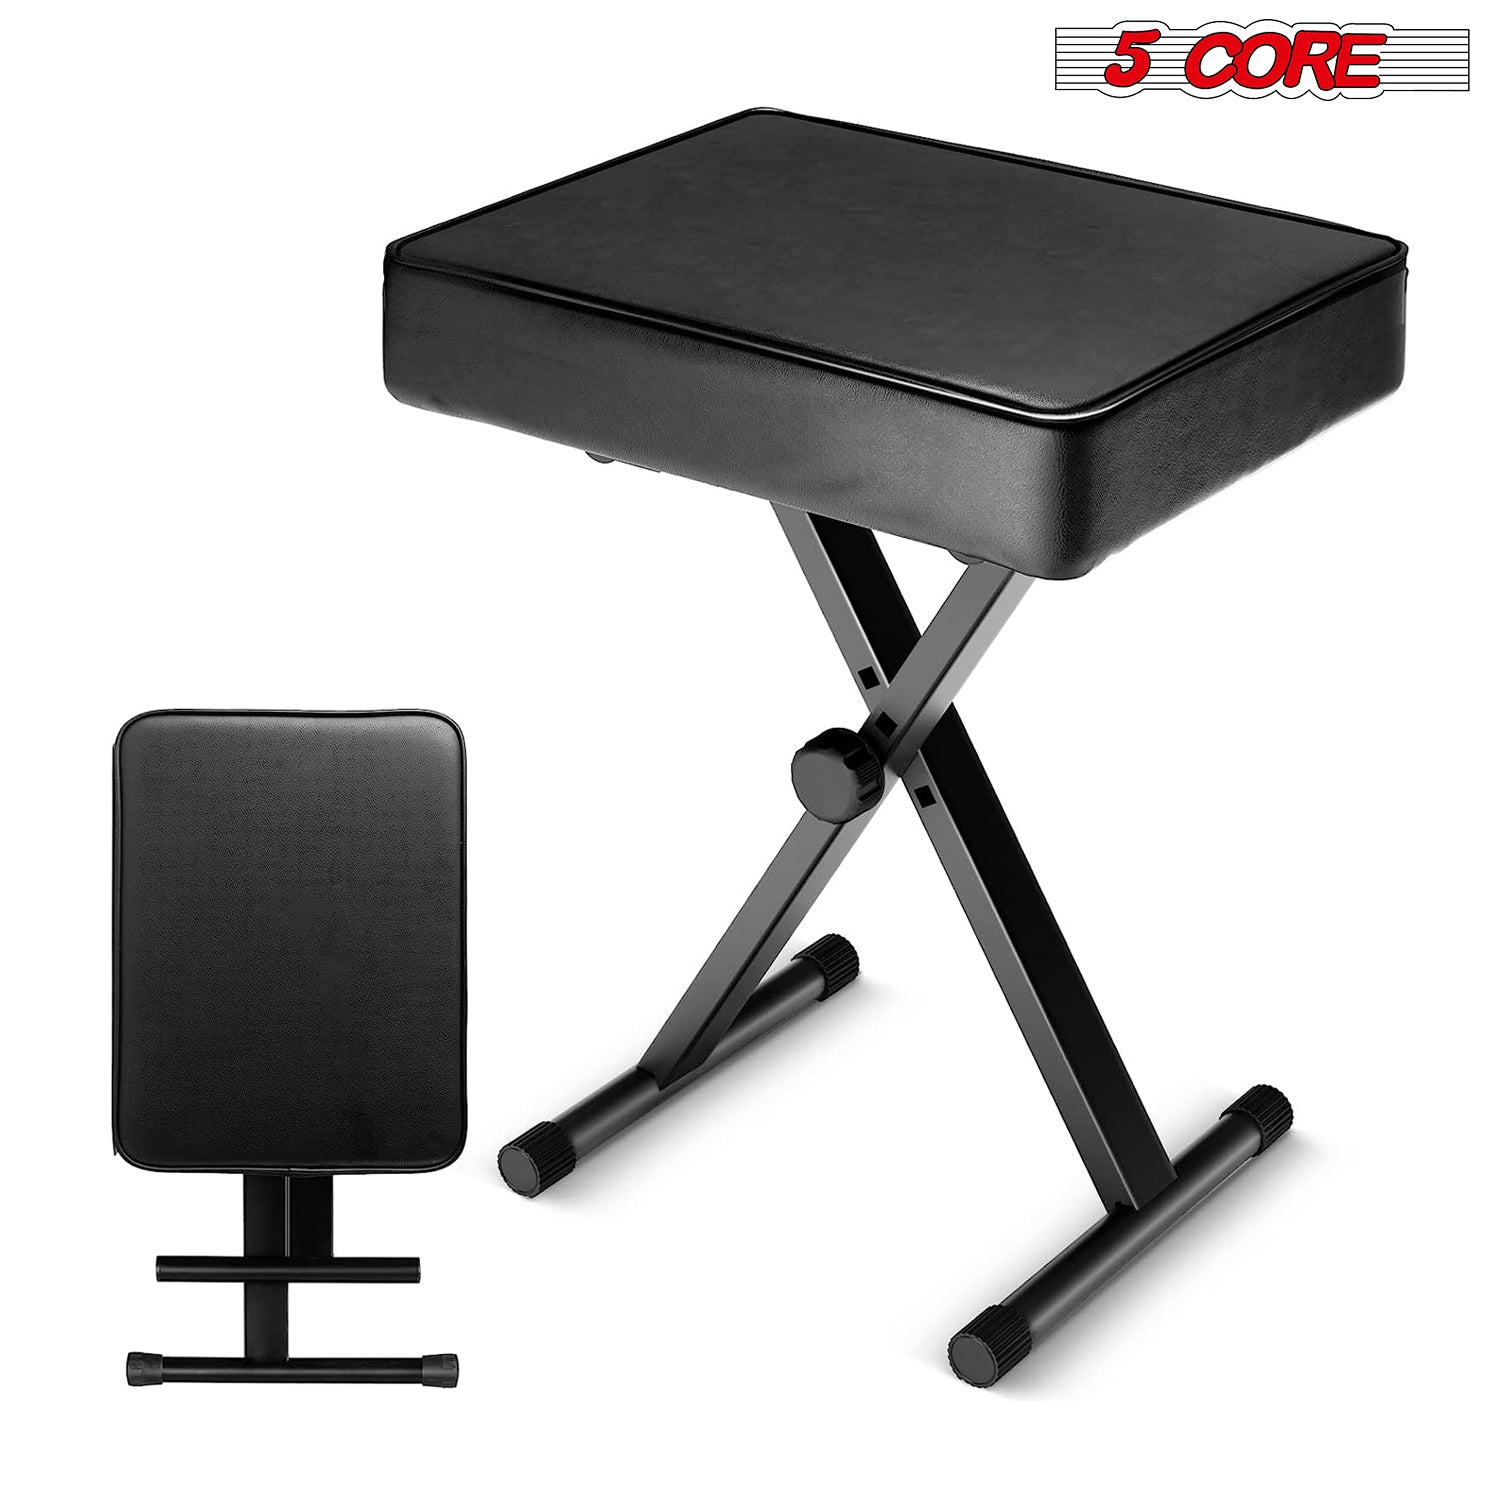 5 Core Adjustable Keyboard Bench 18.5 - 21.2 Inch Heavy Duty X style Bench Piano Stool Chair Thick And Padded Comfortable Guitar Stools - KBB BLK HD